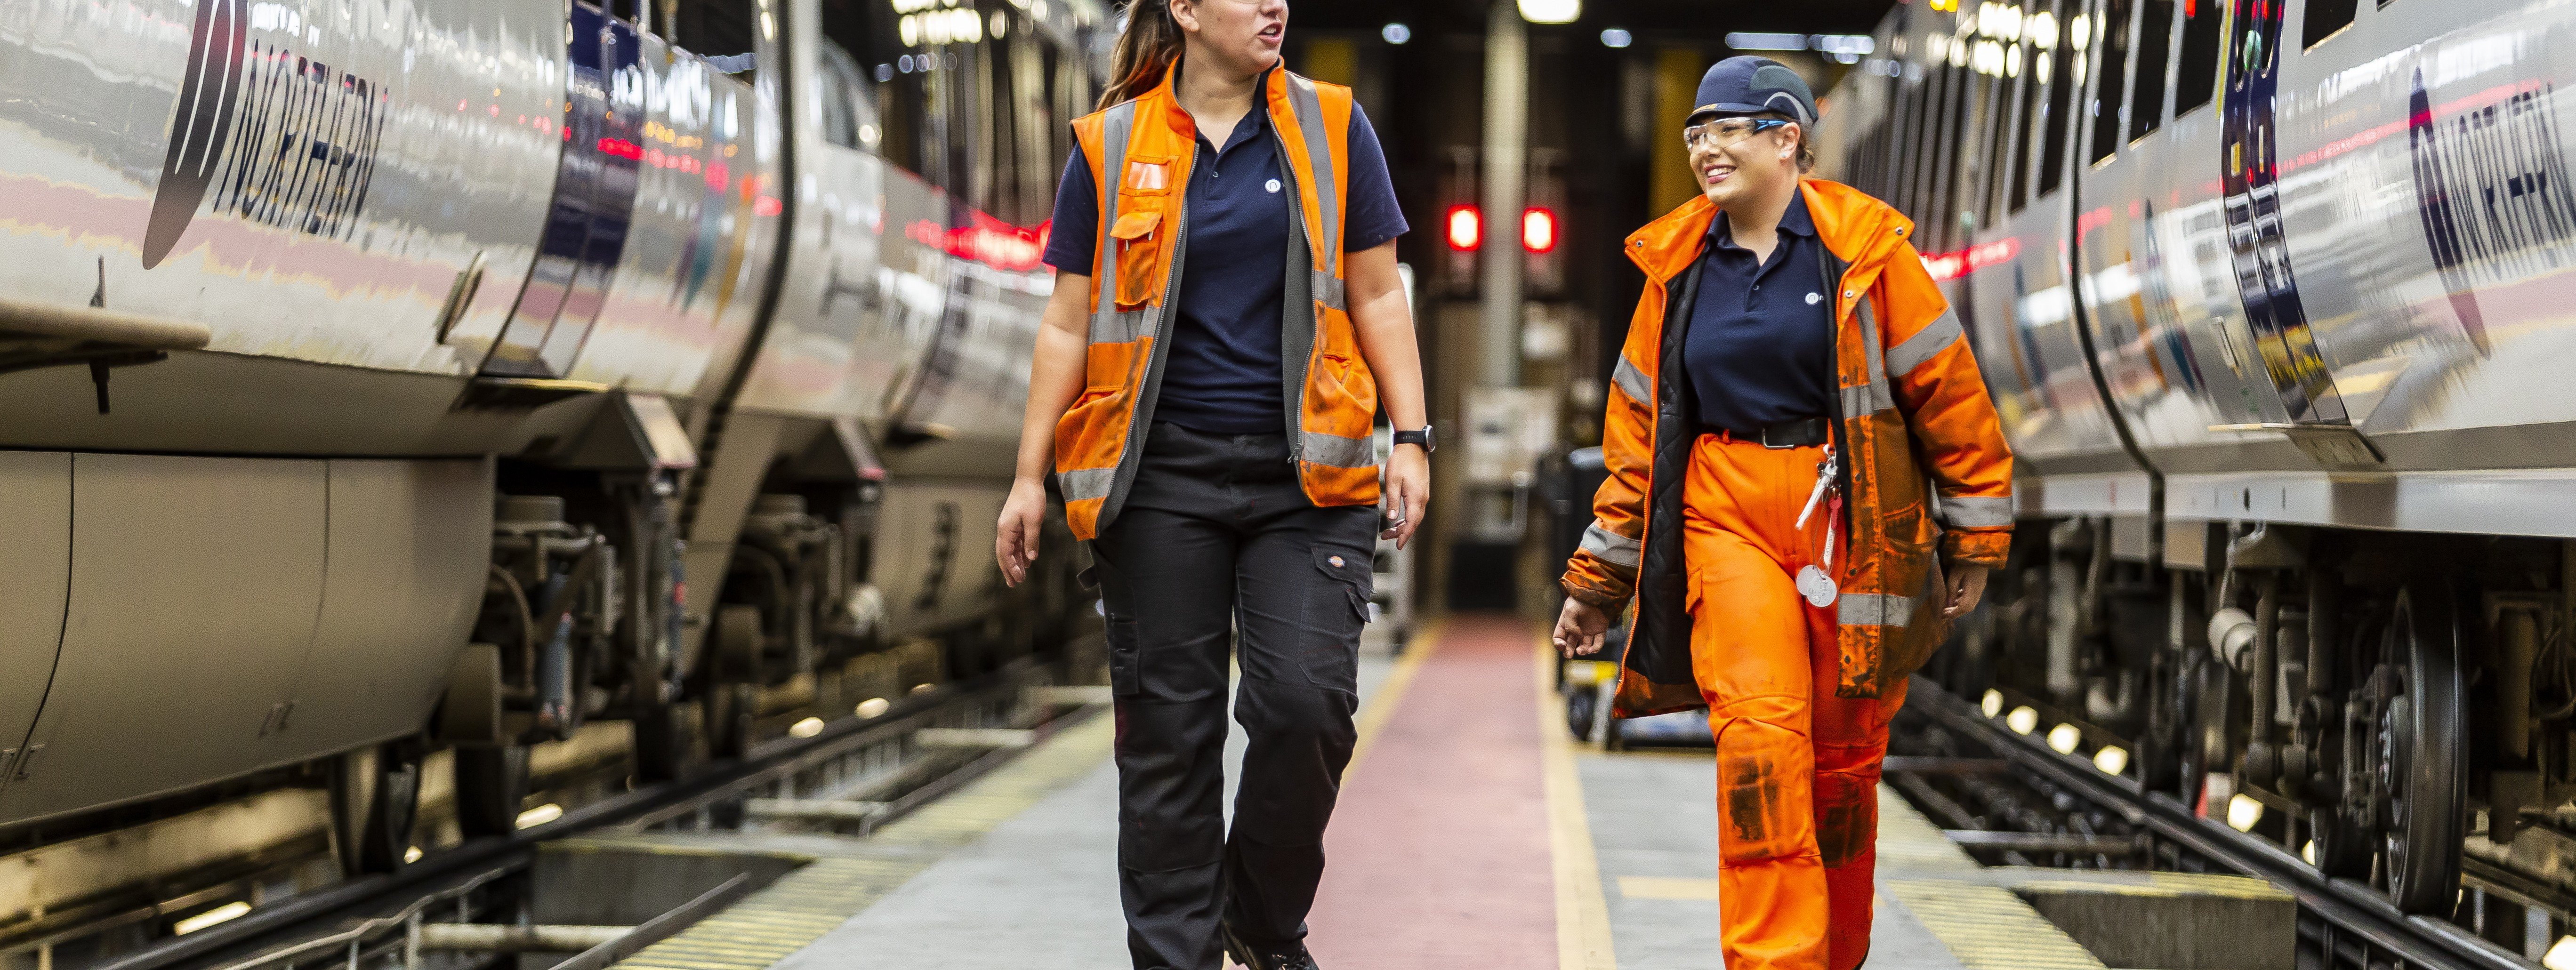 this-image-shows-kate-towns-l-with-a-colleague-at-neville-hill-depot